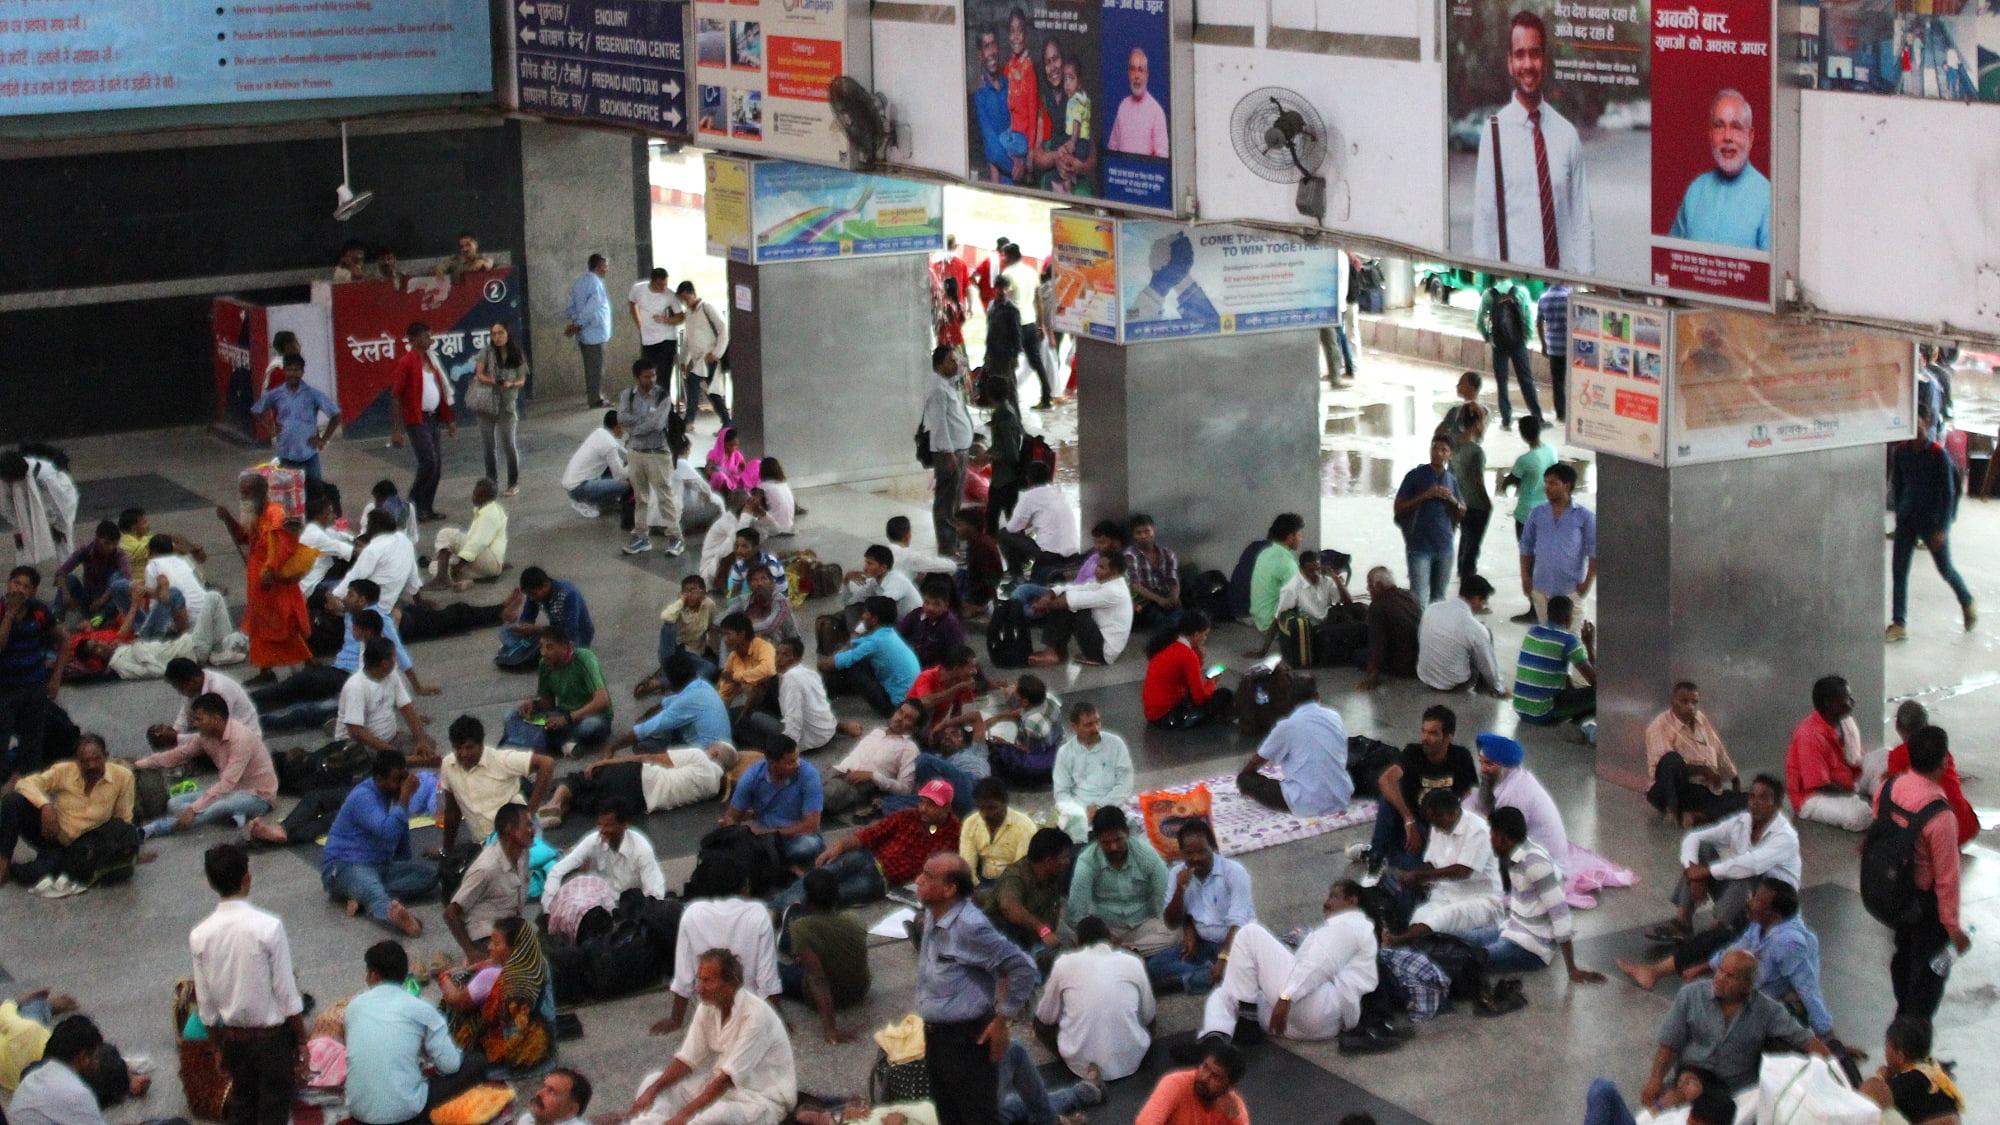 Indian people sleeping and waiting on the floor of the New Delhi railway station lobby.